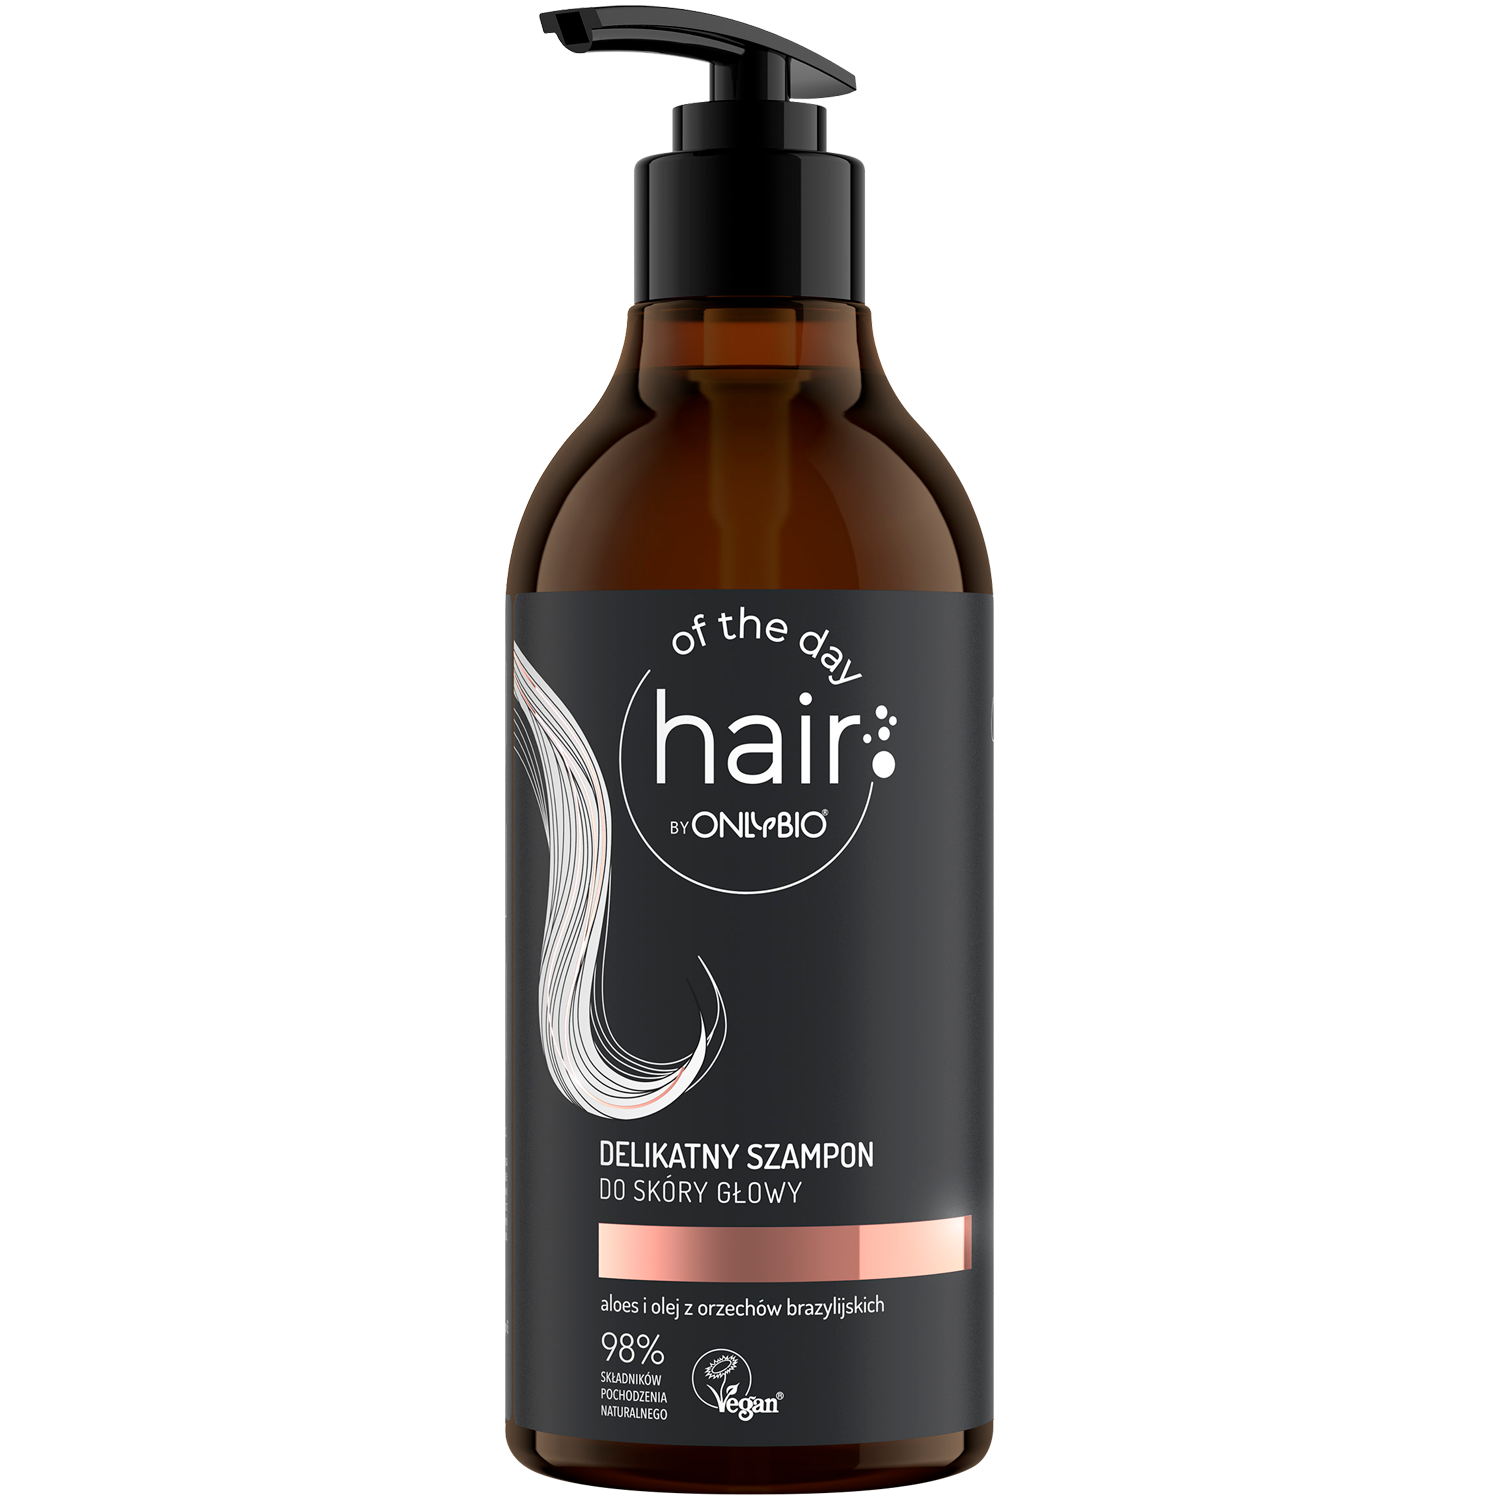 Hair Of The Day By Only Bio delikatny szampon do skóry głowy, 400 ml | hebe .pl